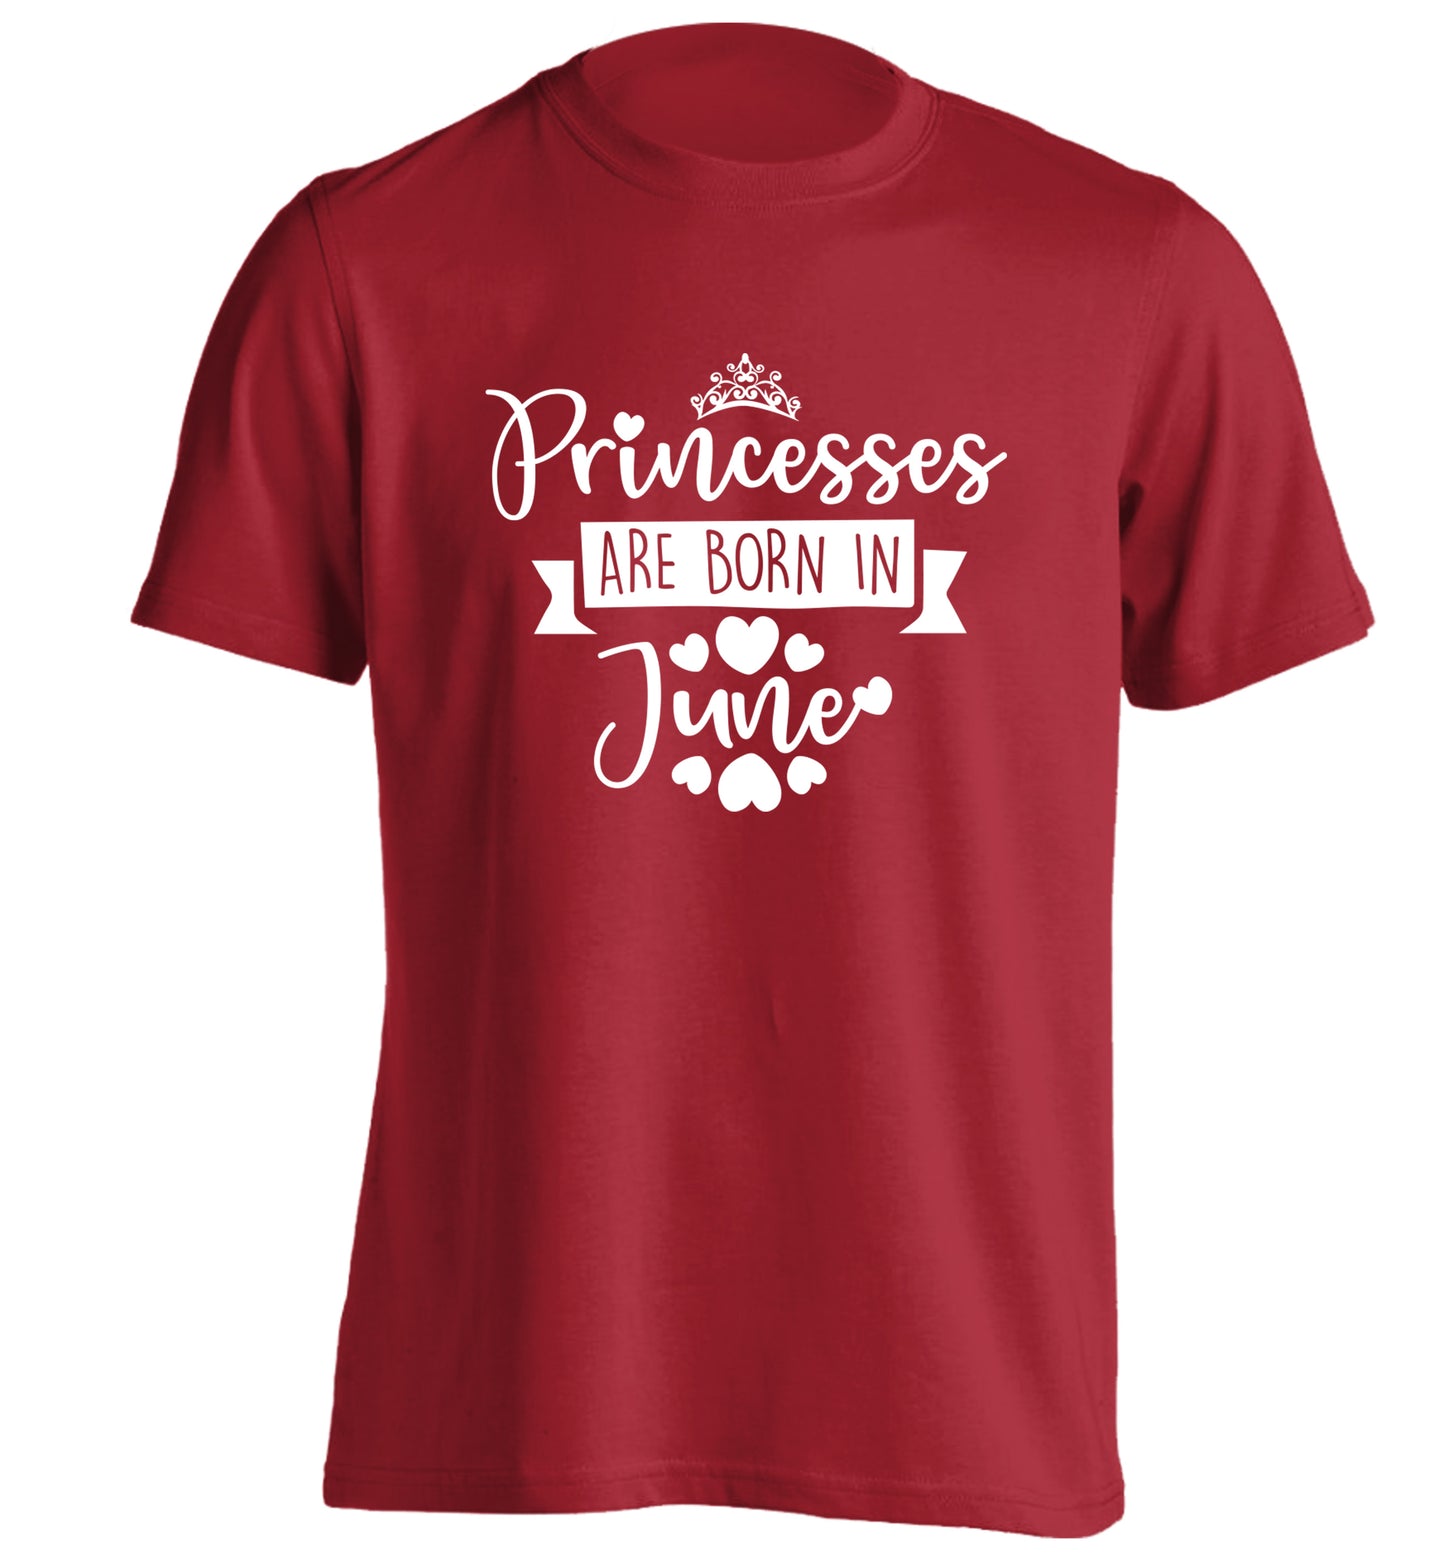 Princesses are born in June adults unisex red Tshirt 2XL